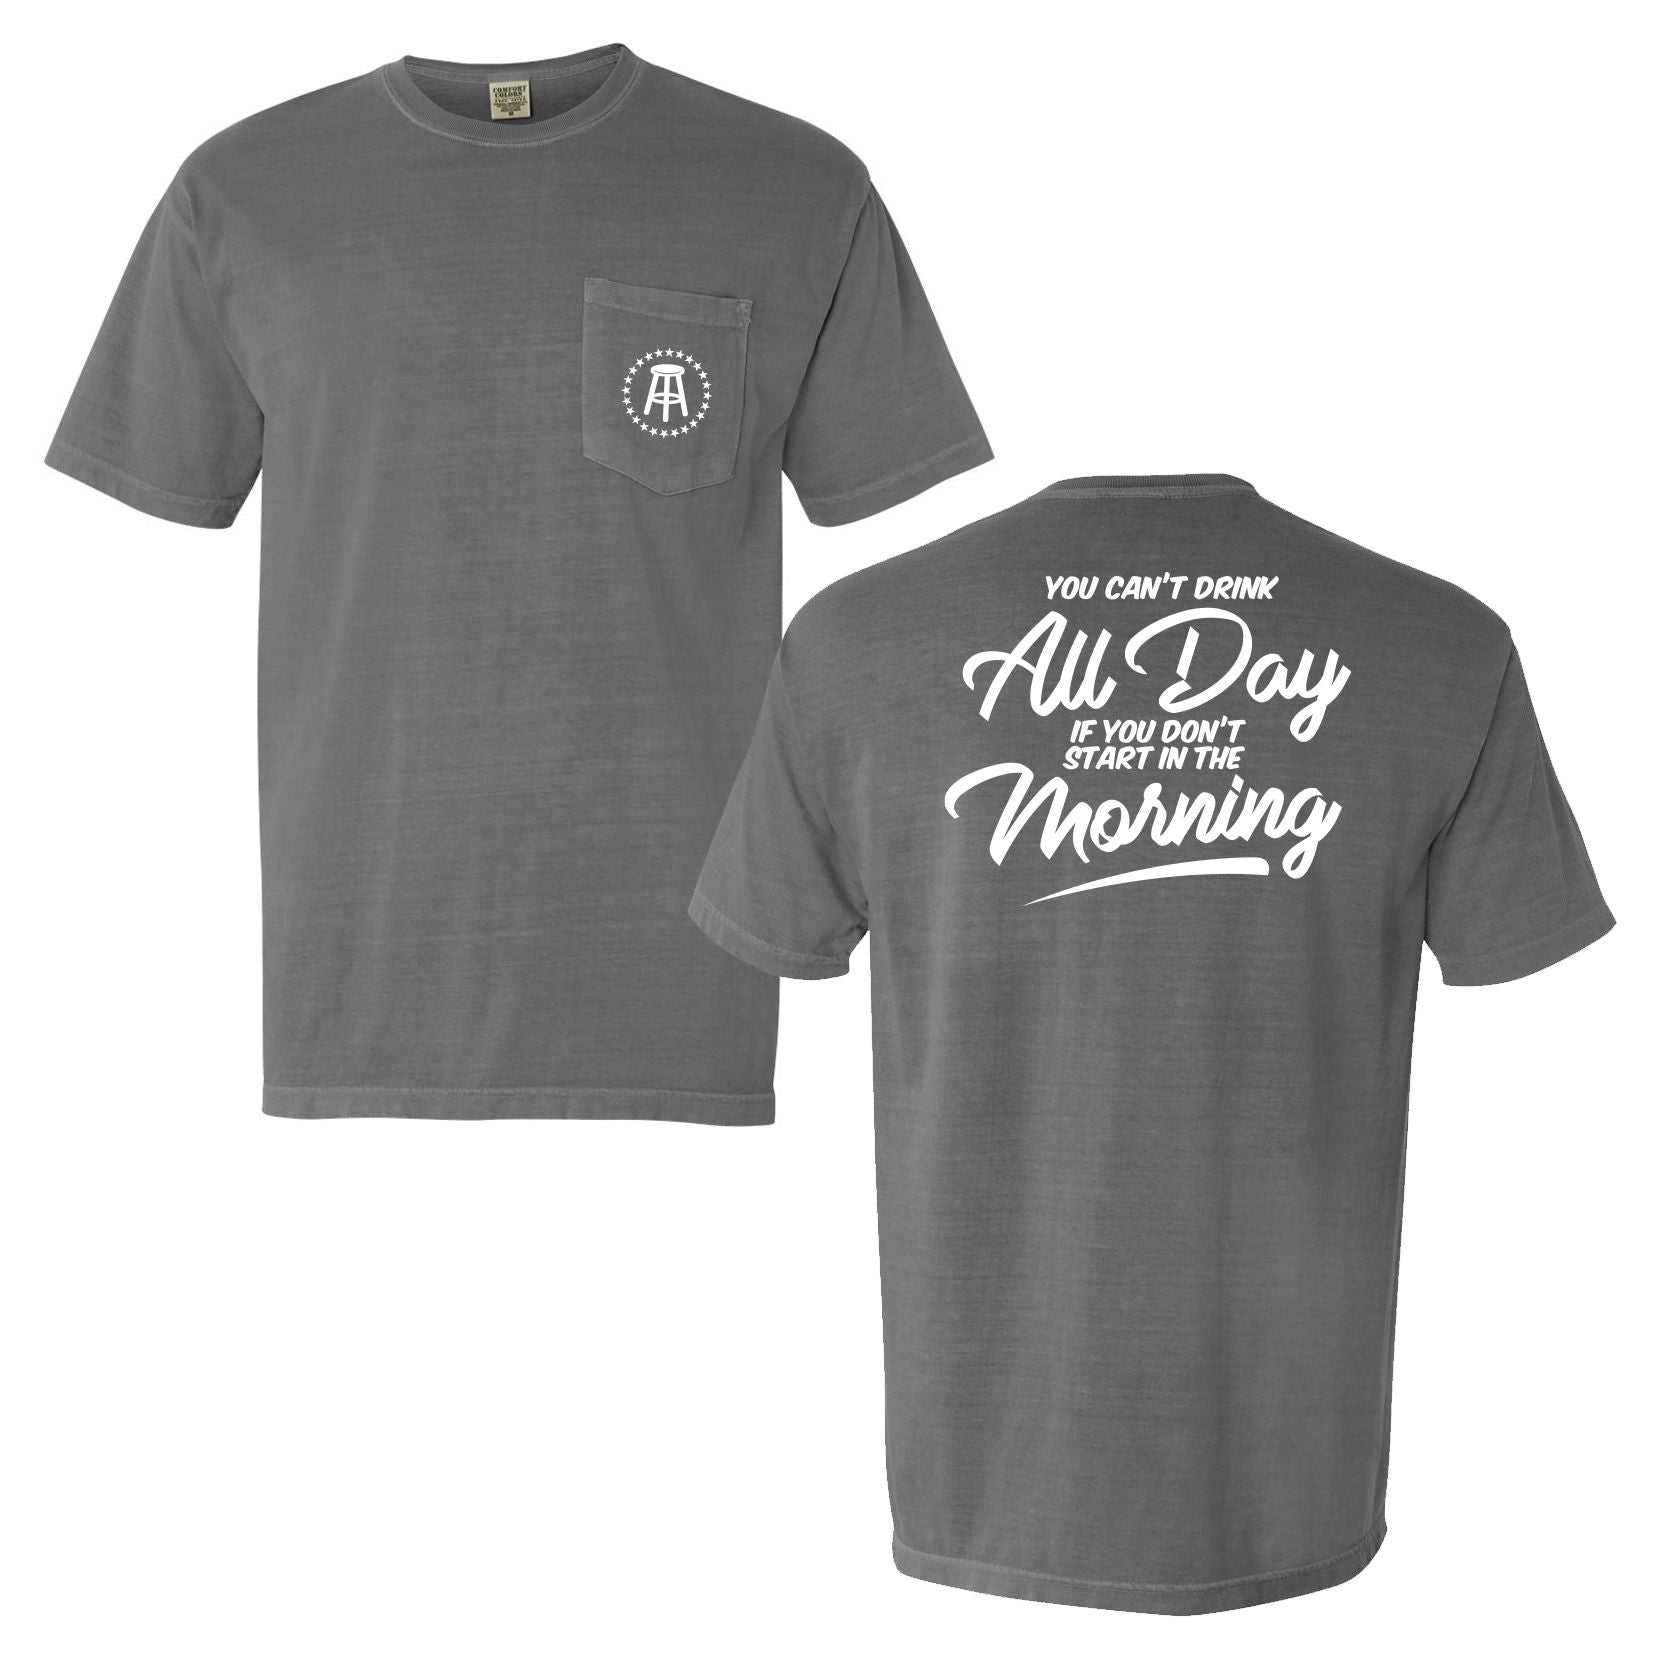 Can't Drink All Day Pocket Tee II